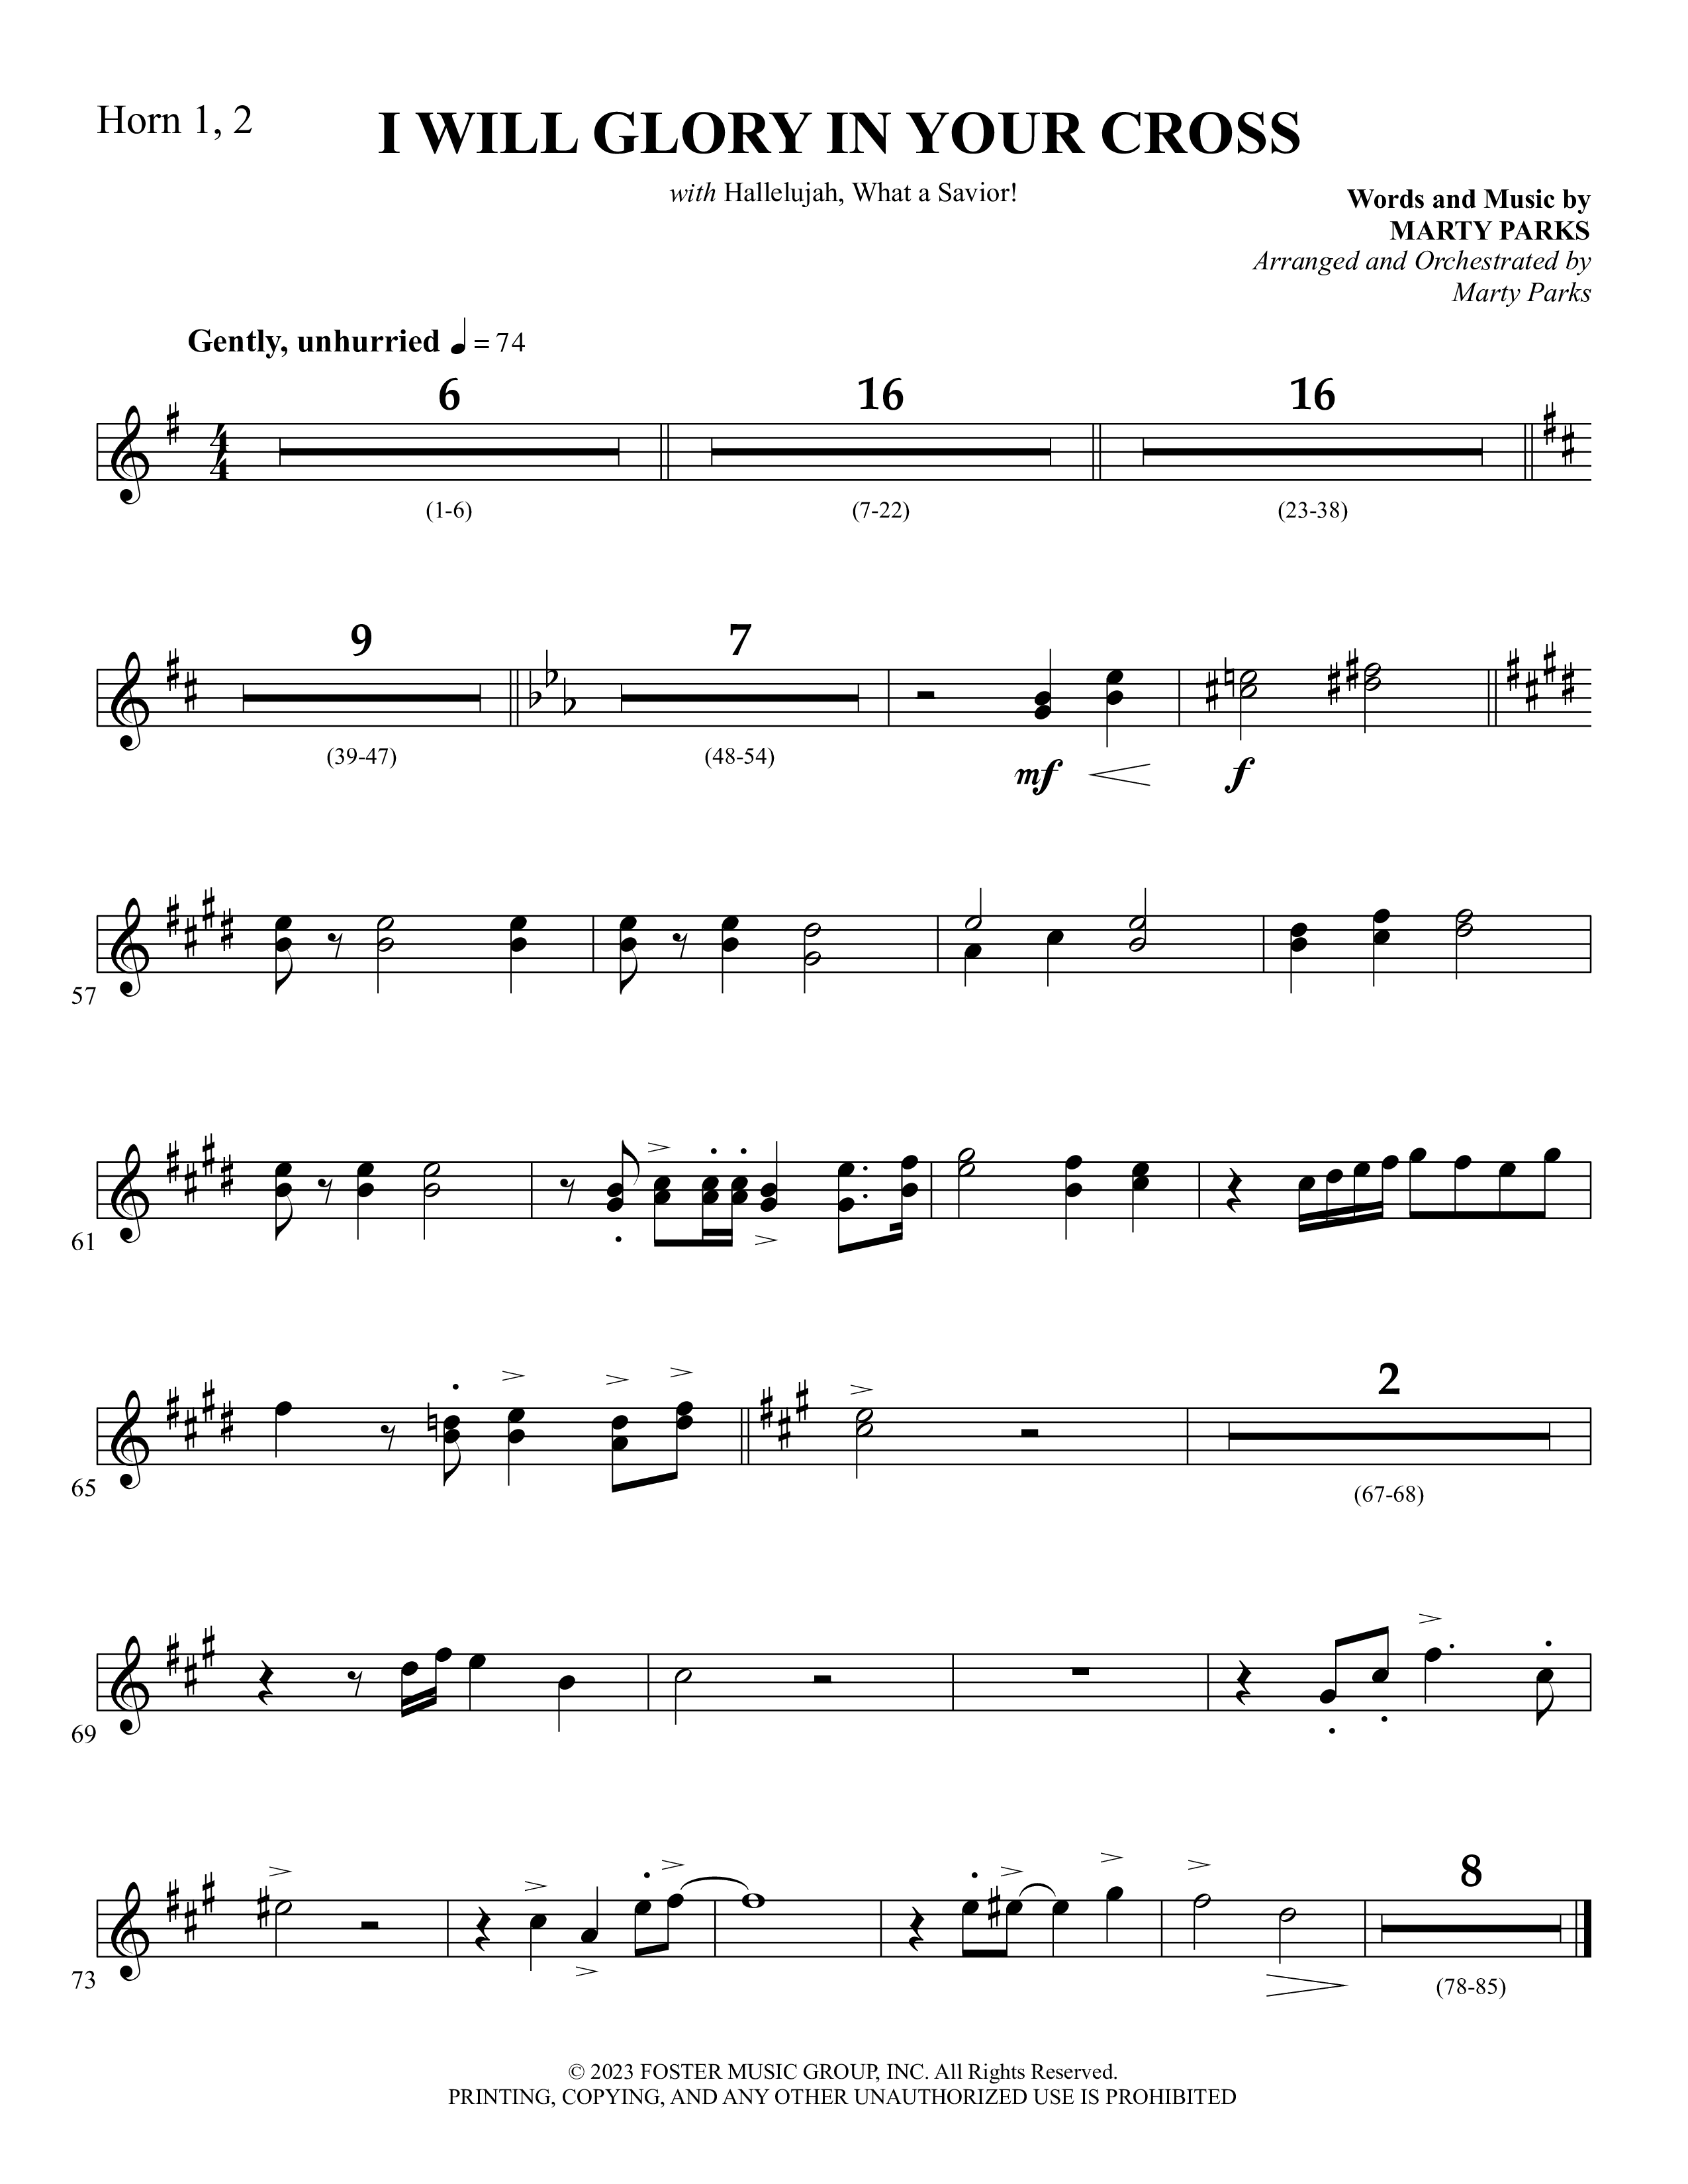 I Will Glory In Your Cross (with Hallelujah What A Savior) French Horn 1/2 (Foster Music Group / Arr. Marty Parks)